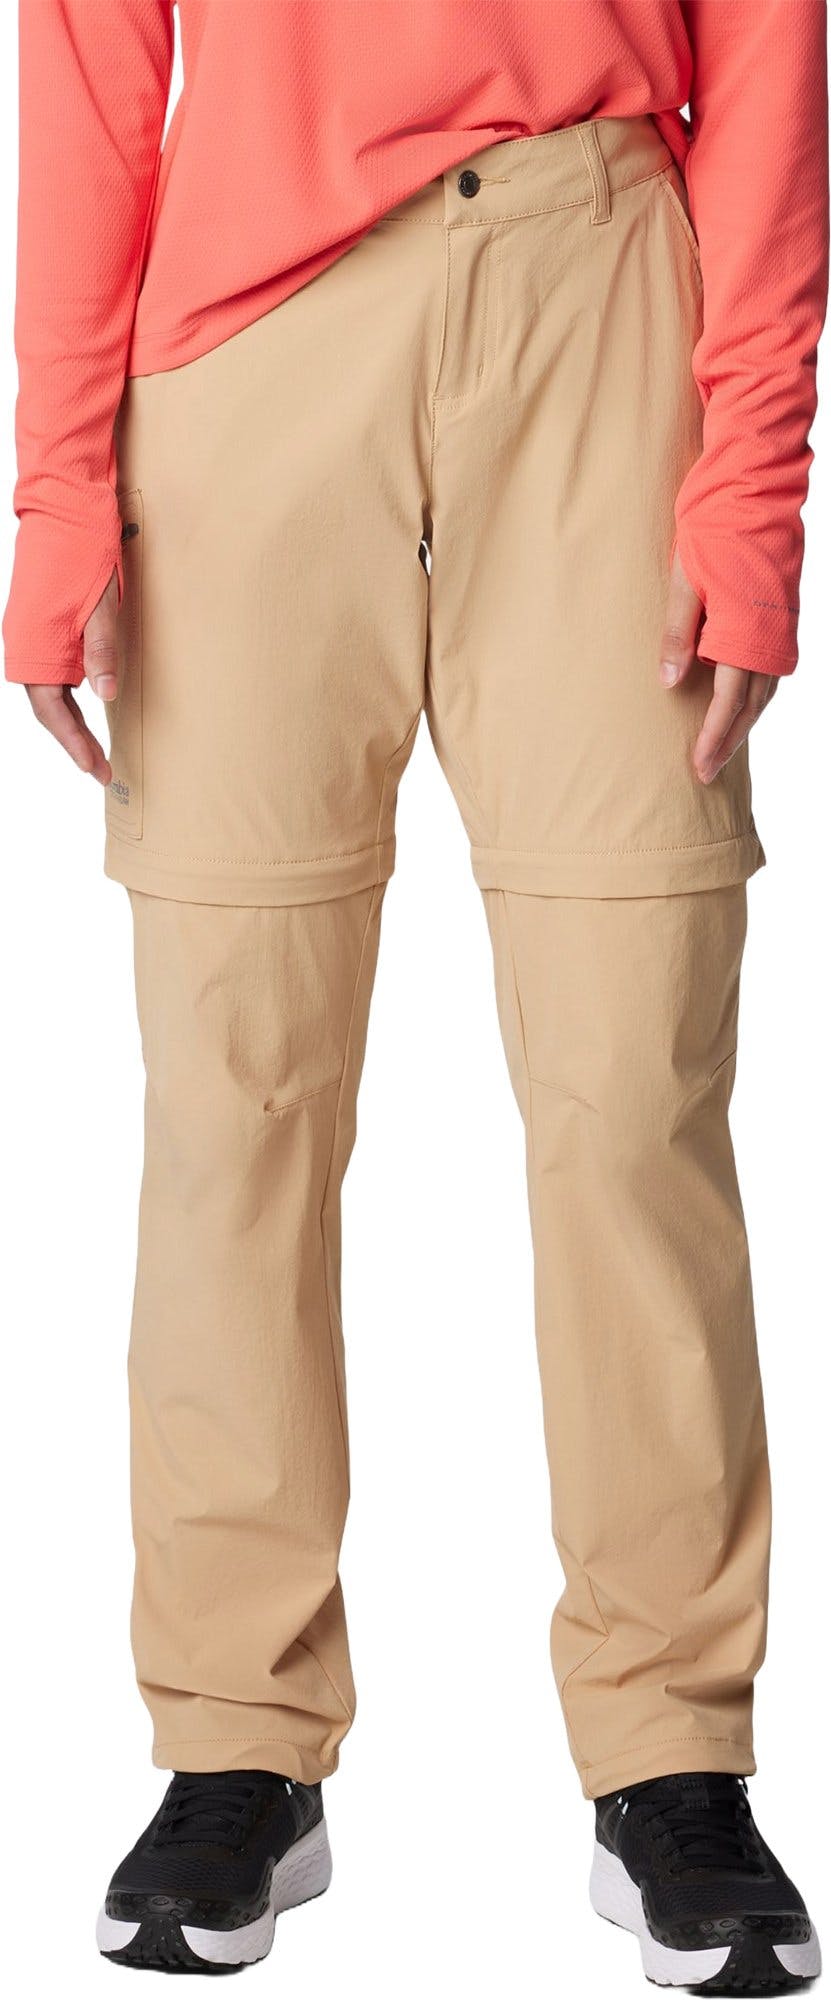 Product image for Summit Valley Convertible Pant - Women's